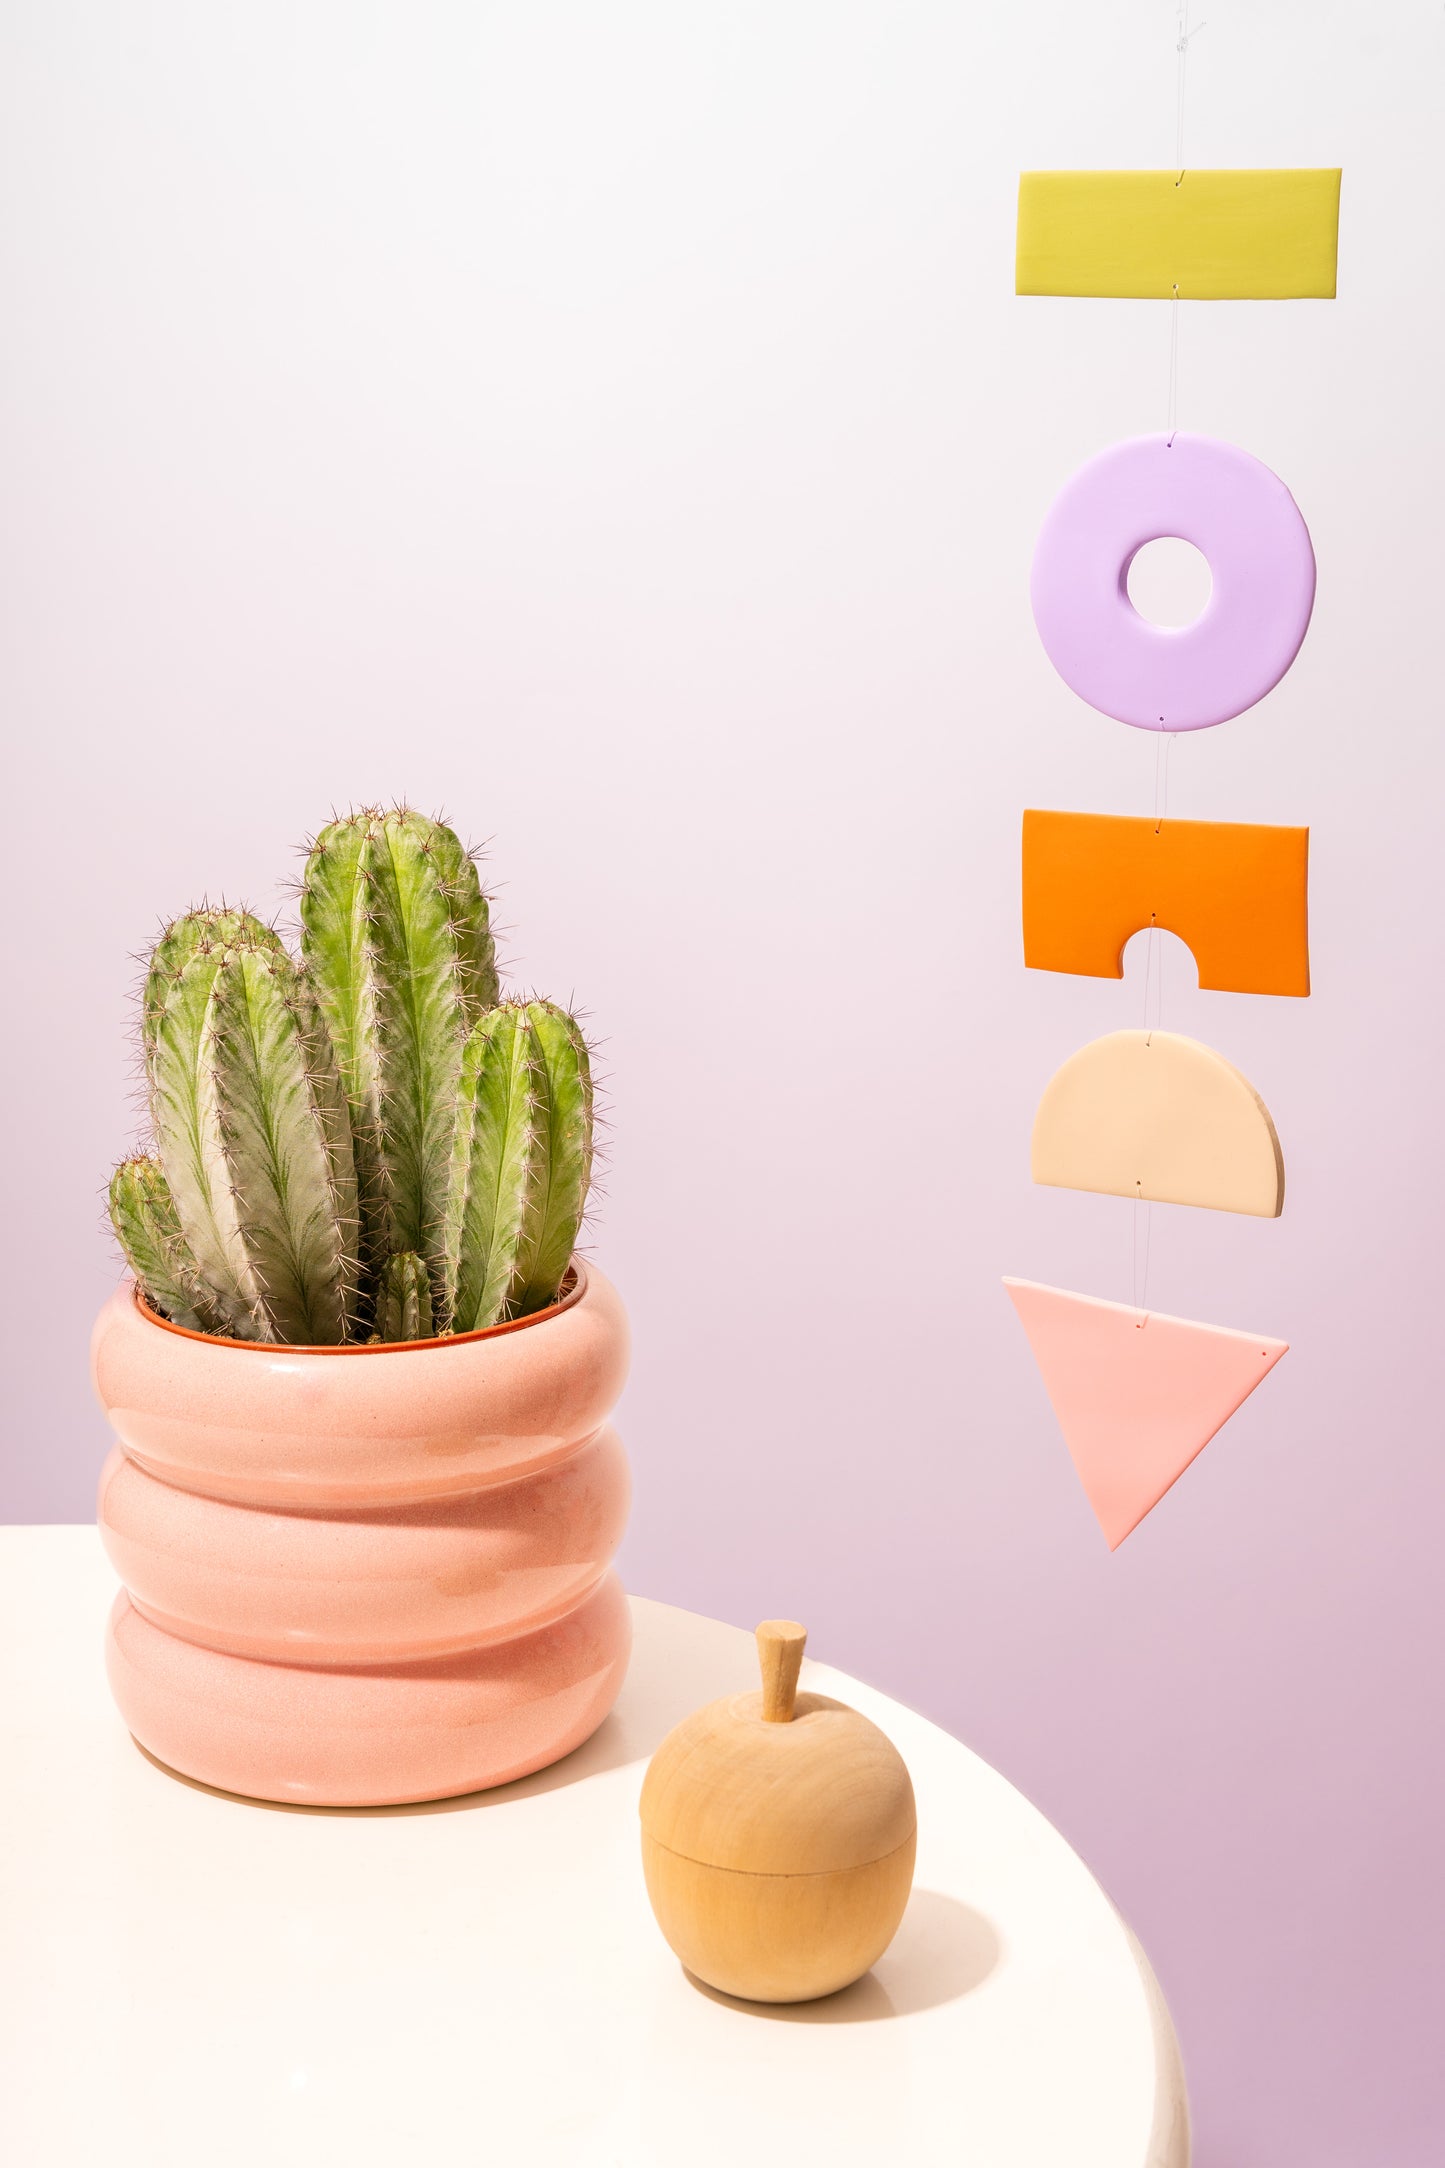 Playful abstract mobile wall hanger by Studio Bim Bam - pastel